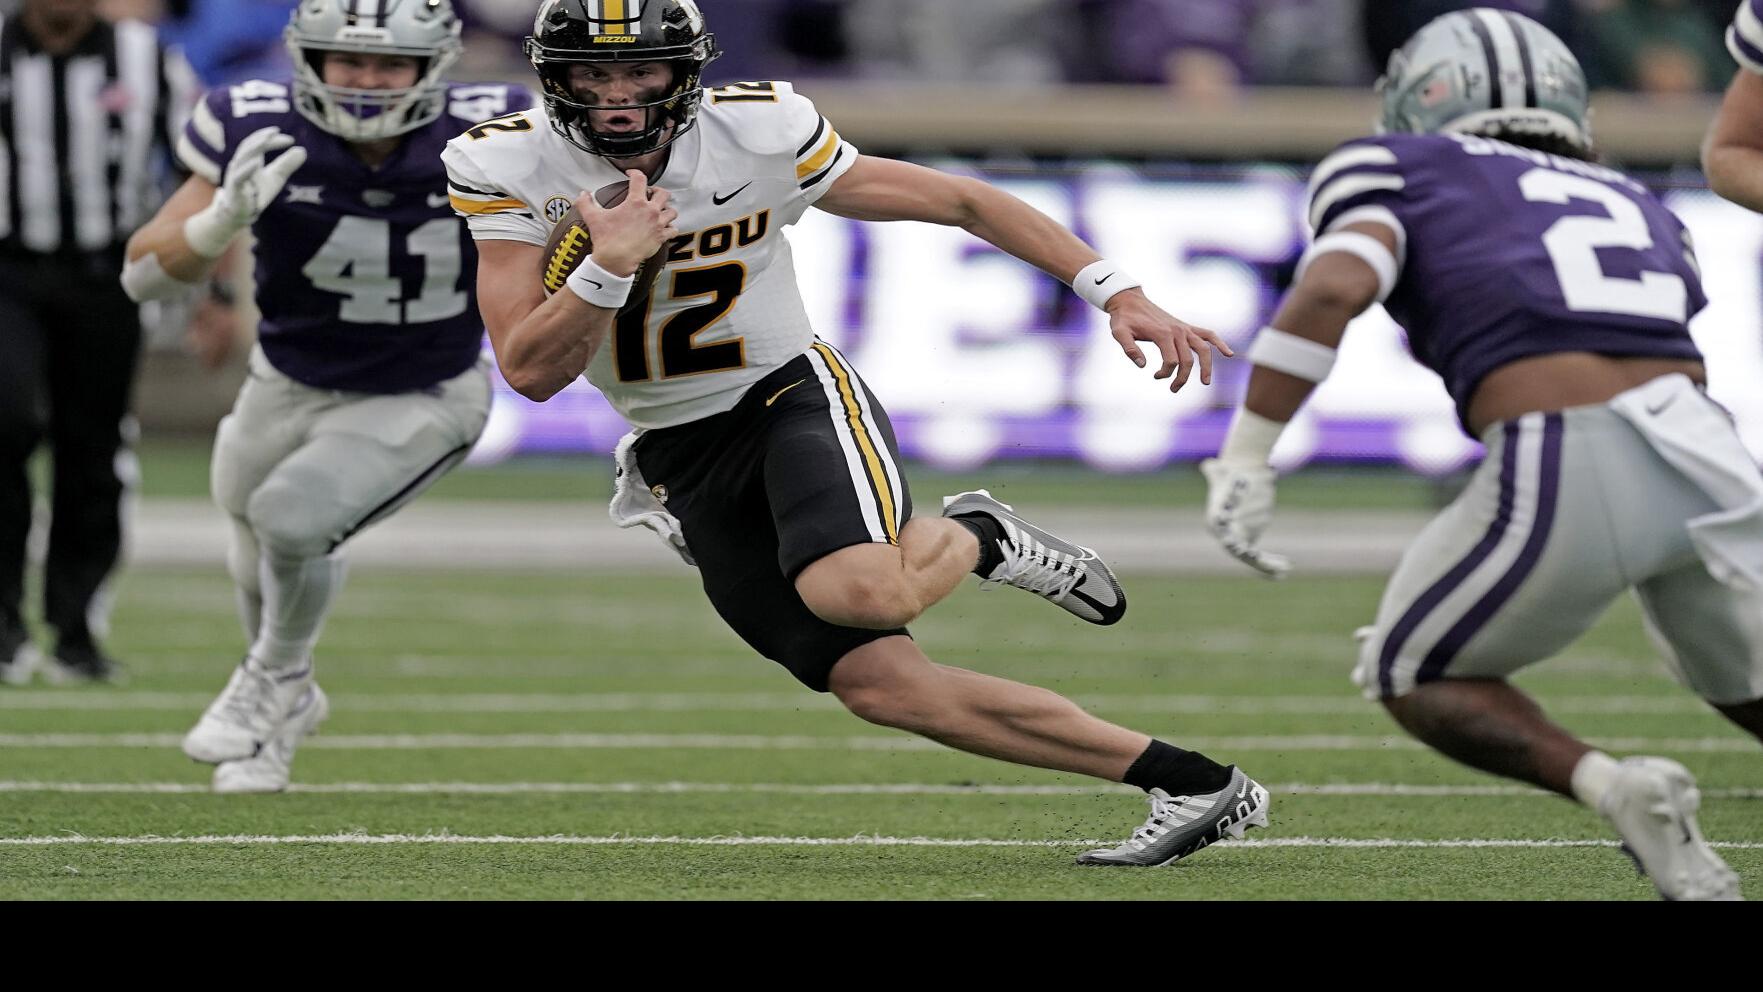 Mizzou football offense goes missing in season's first loss at Kansas State